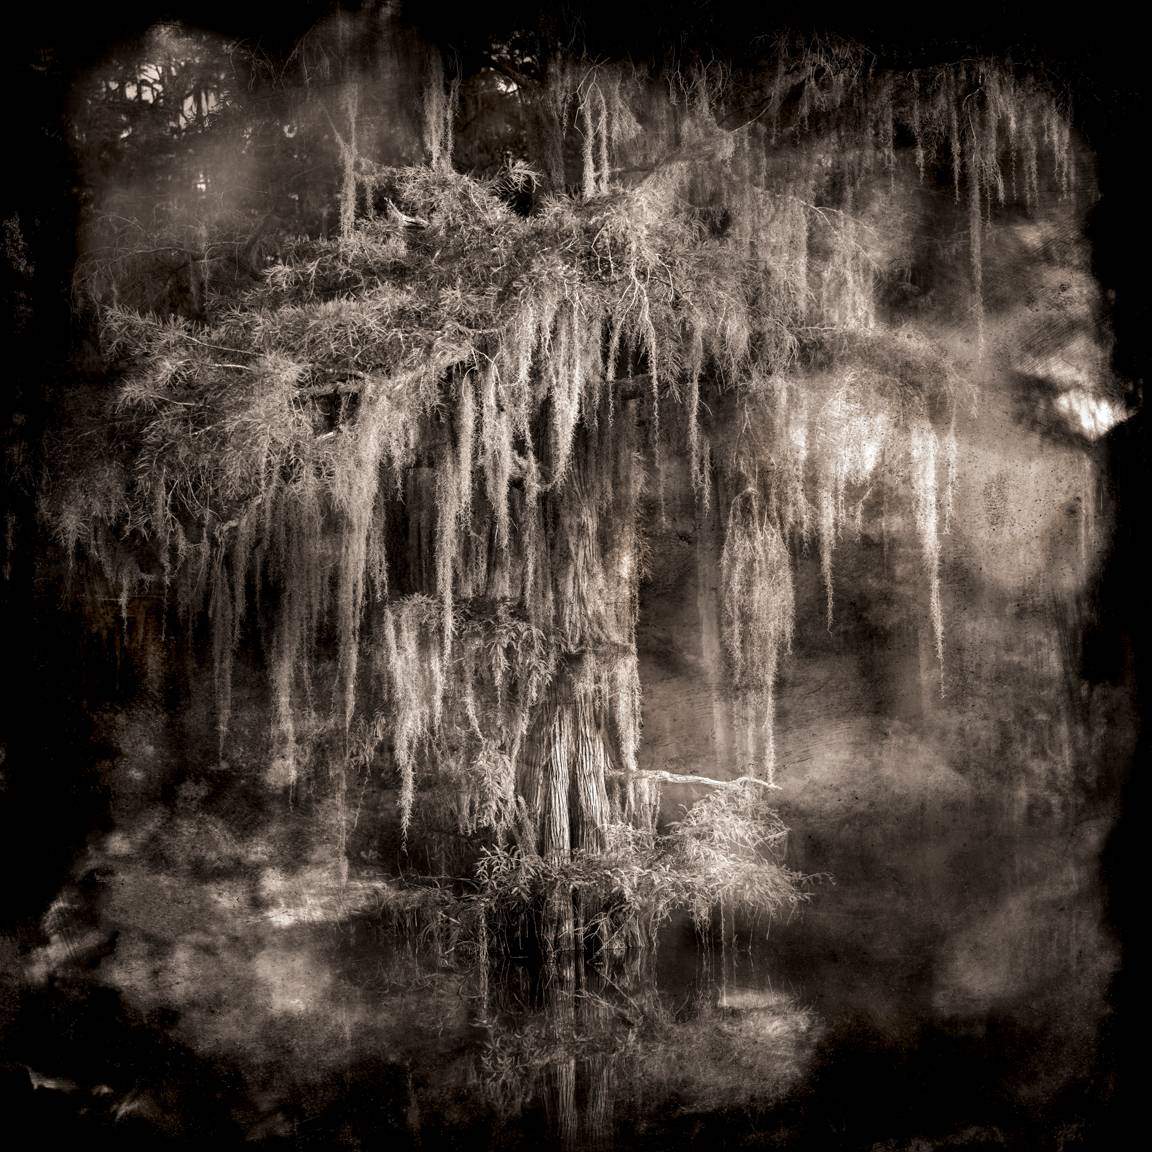 Phot called Ghostlight by Keith Carter